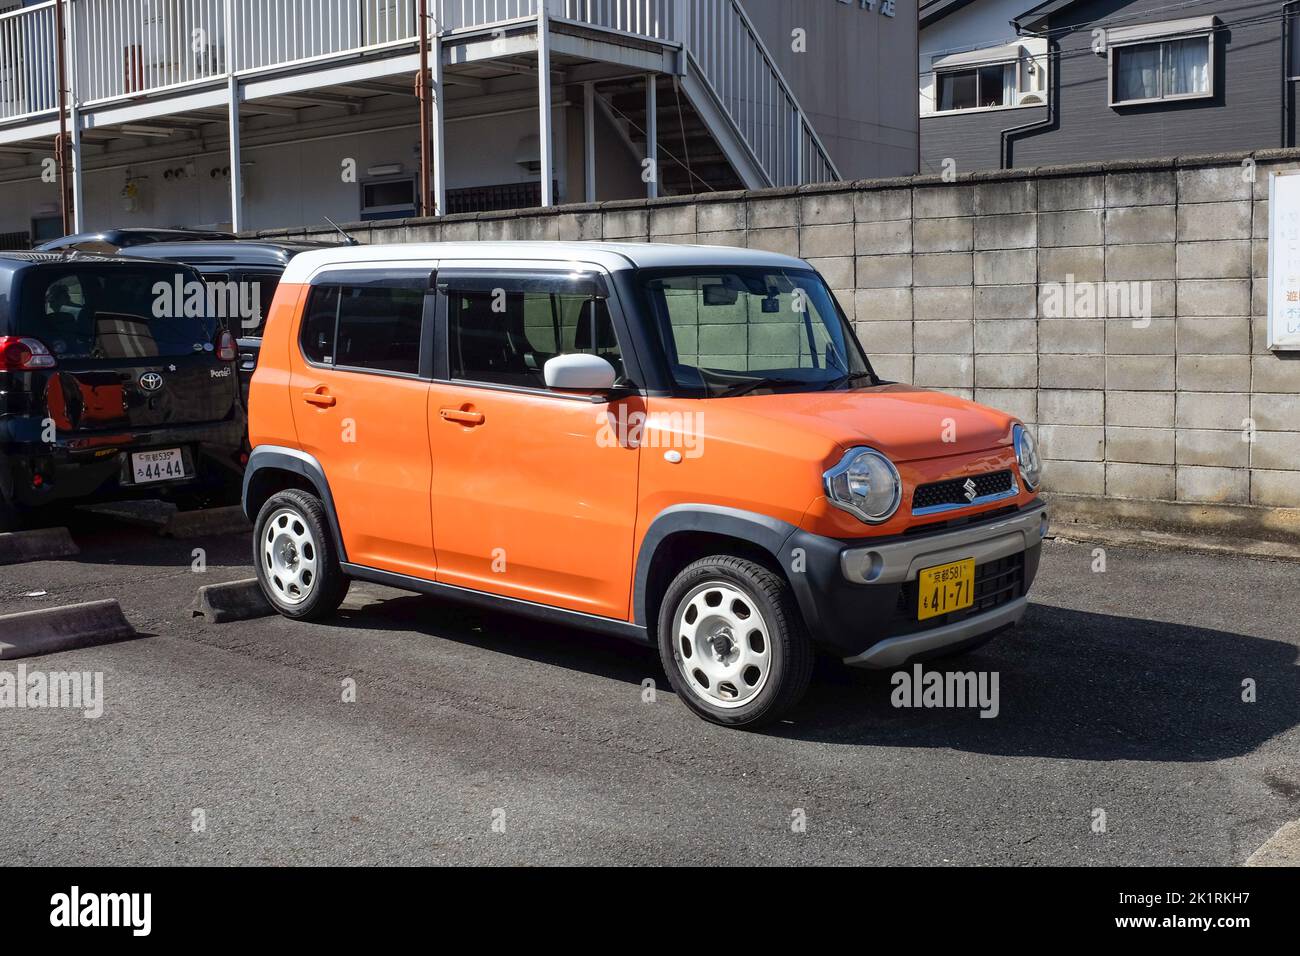 A so-called 'Kei' car, a category of small Japanese vehicles that are cheaper to run thanks to their small engines and cheaper automobile tax rates. Stock Photo